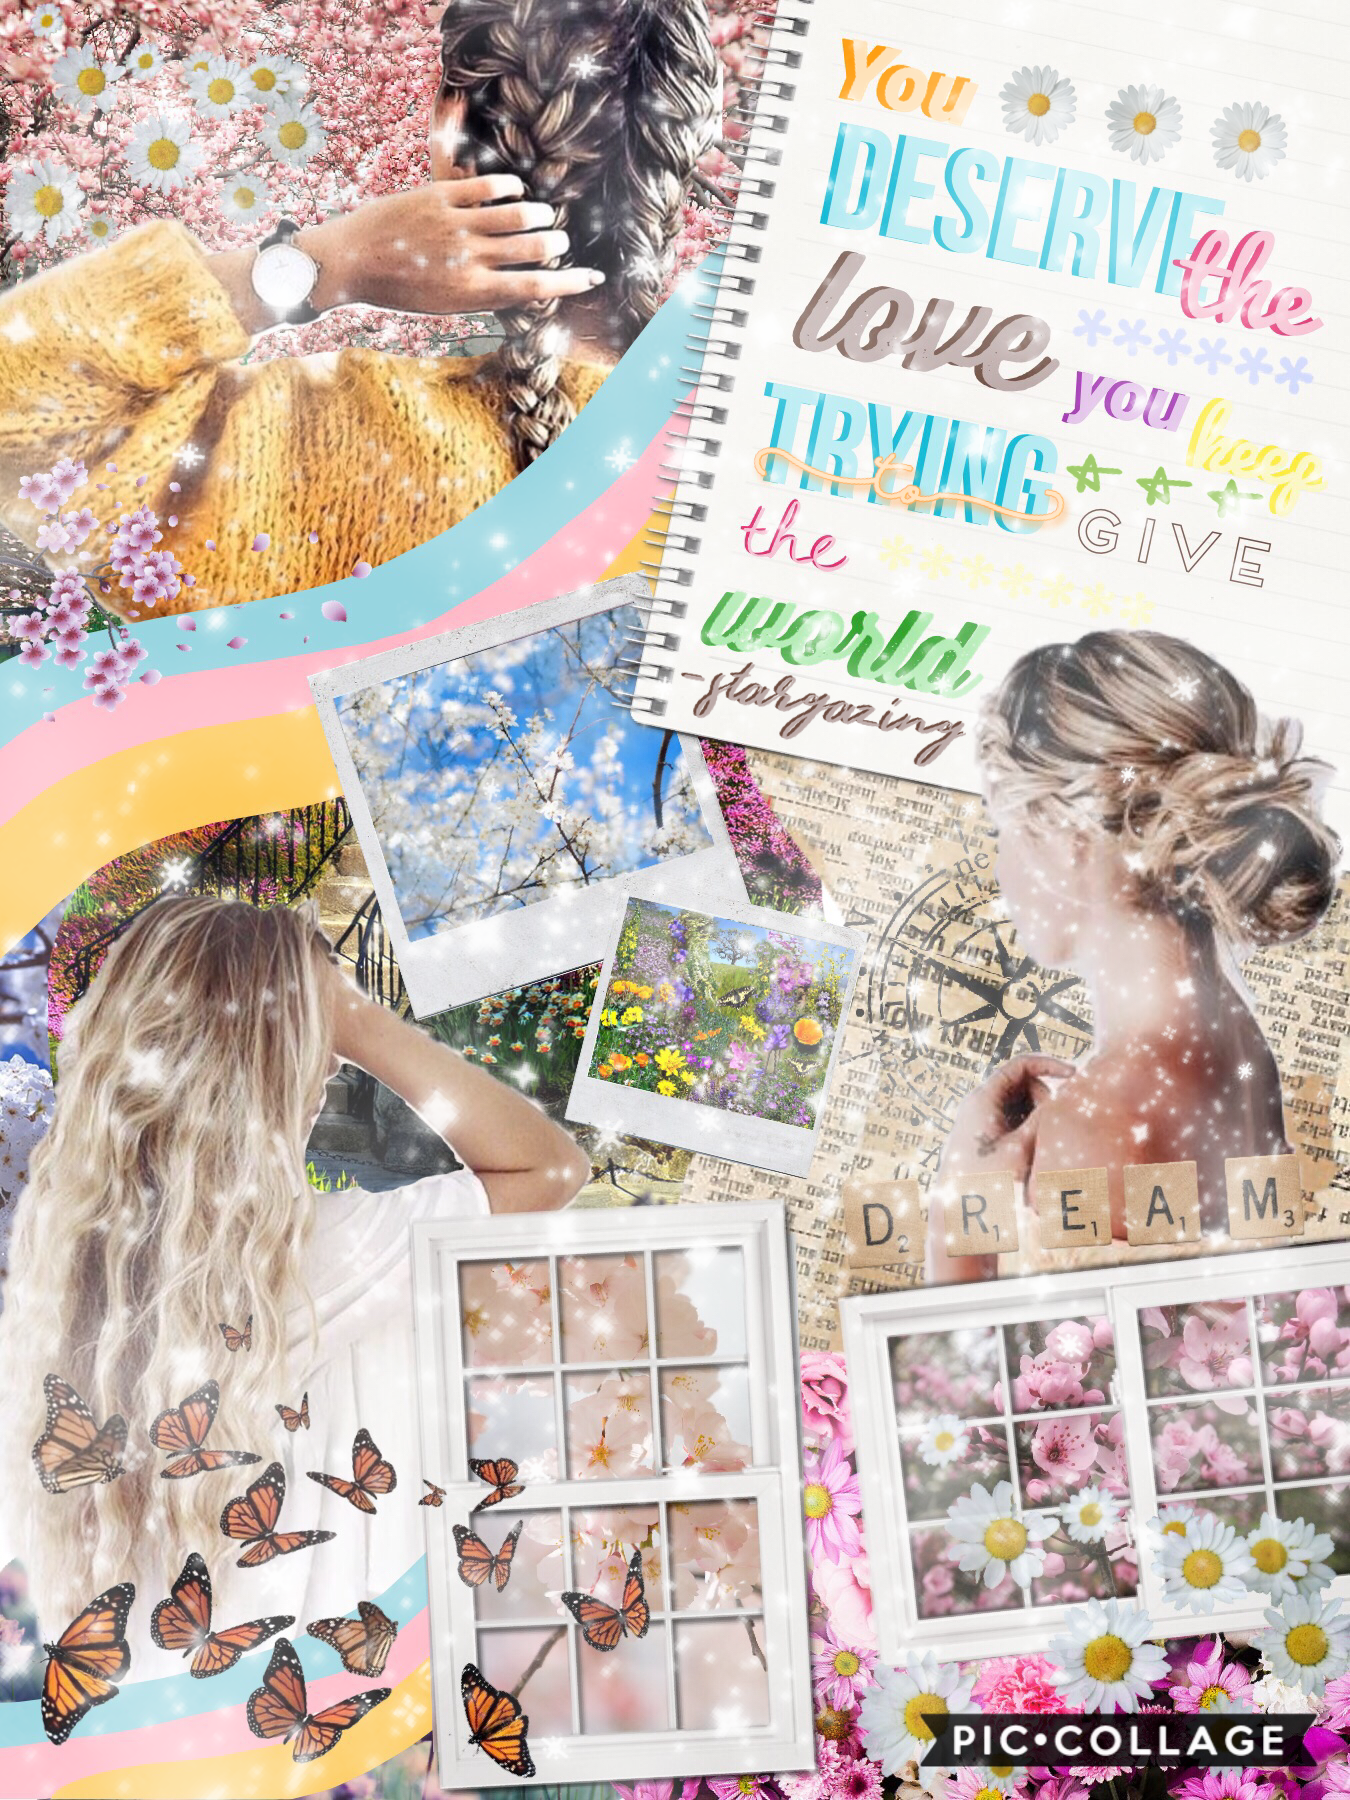 🌸t a p🌸
Inspired by: @Blossom-
Also, cred to @-bubblebliss- extras 
for some of the pics. I can’t believe I 
actually made this!!! Ahhhhh